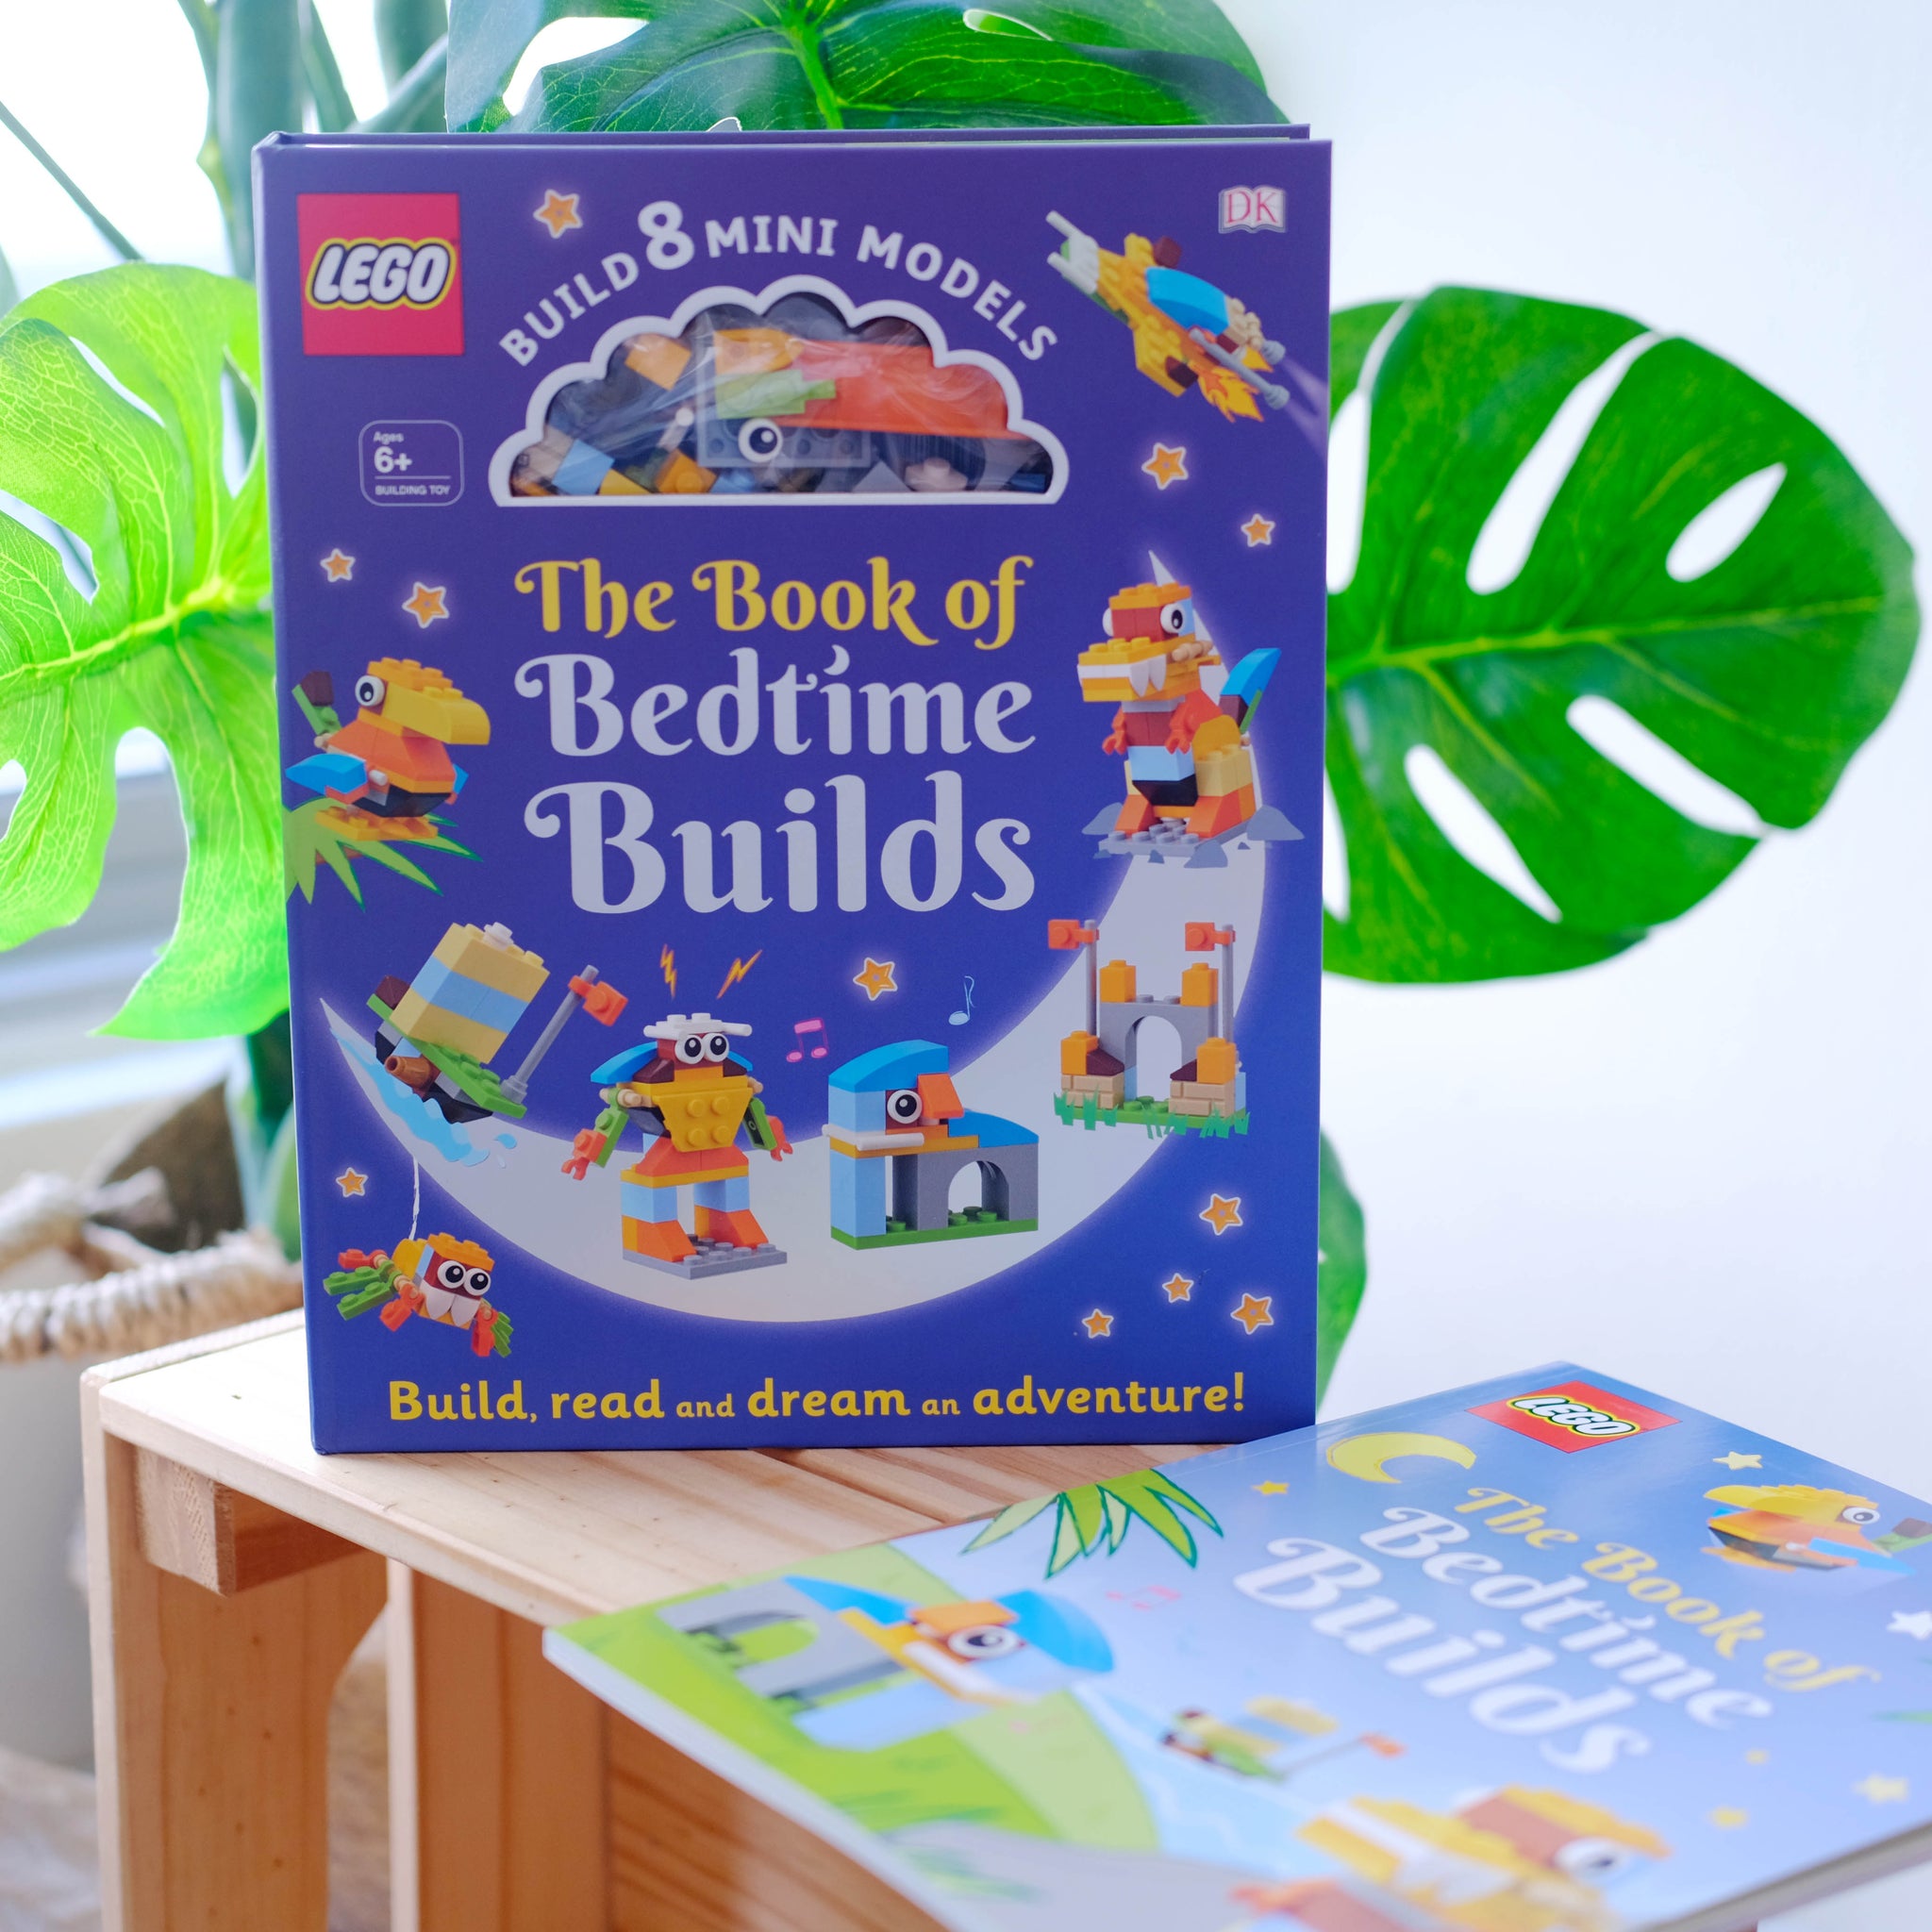 The LEGO Book of Bedtime Builds : With Bricks to Build 8 Mini Models